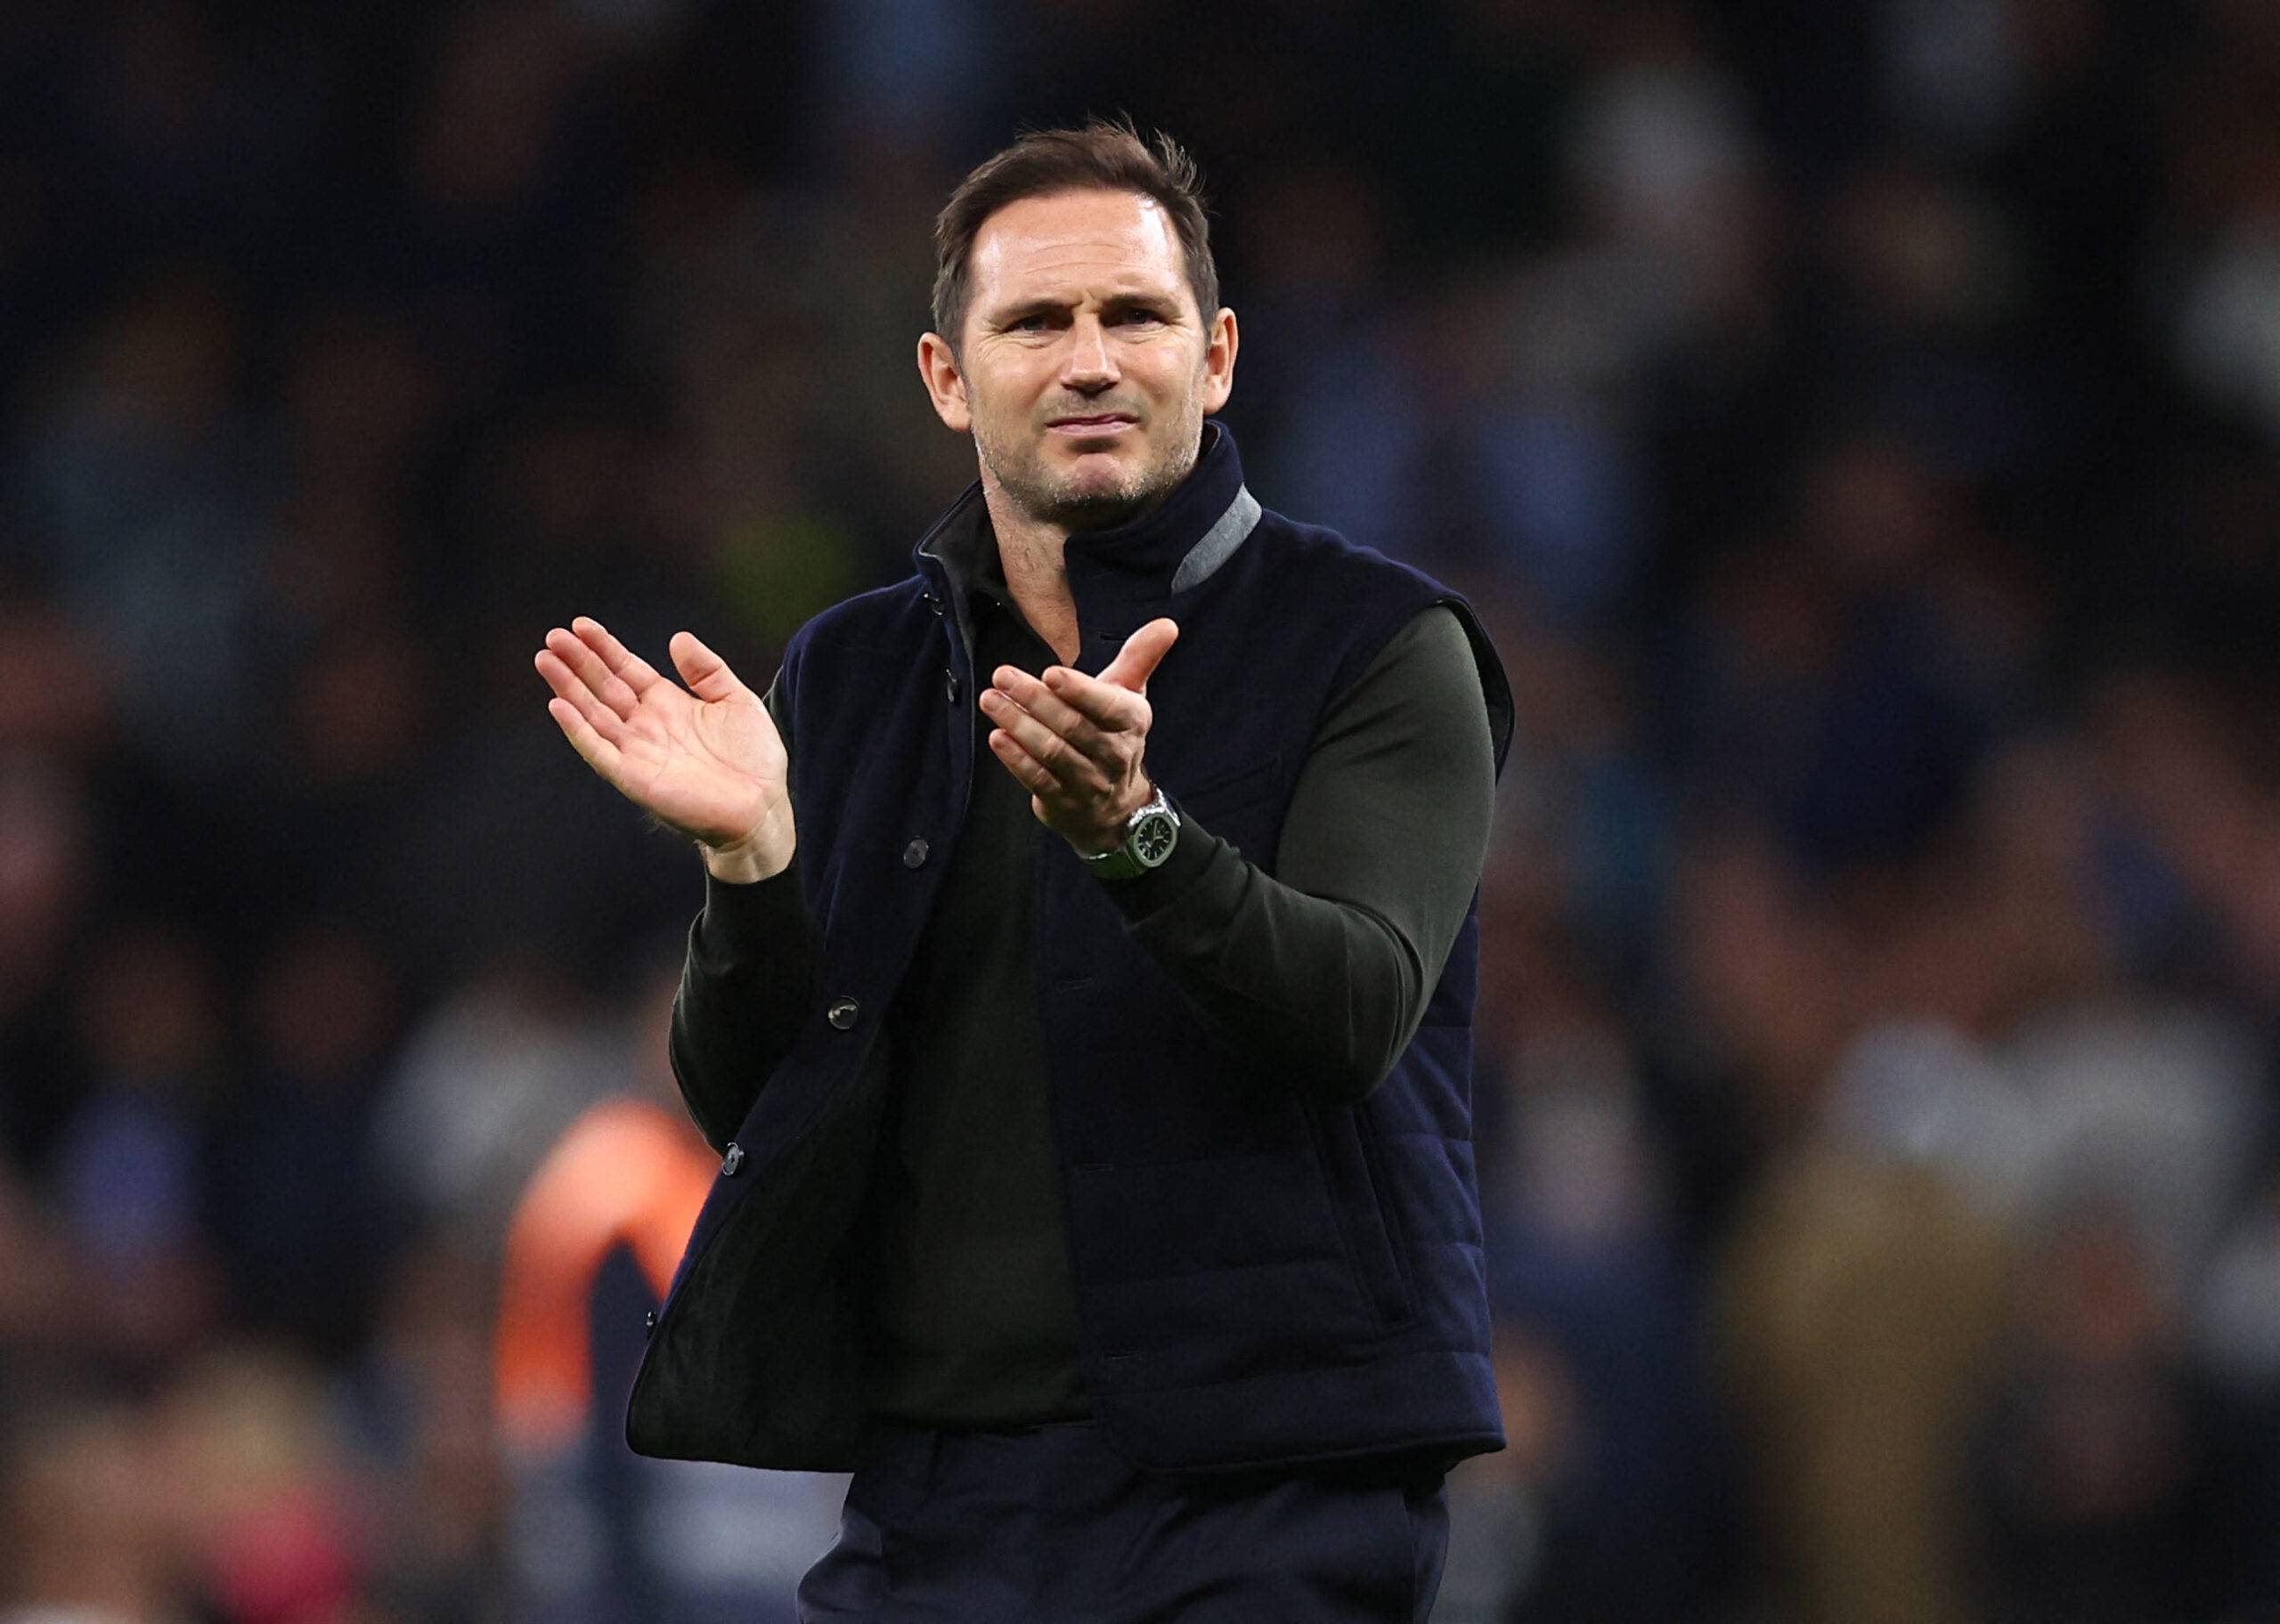 Everton manager Frank Lampard applauding supporters